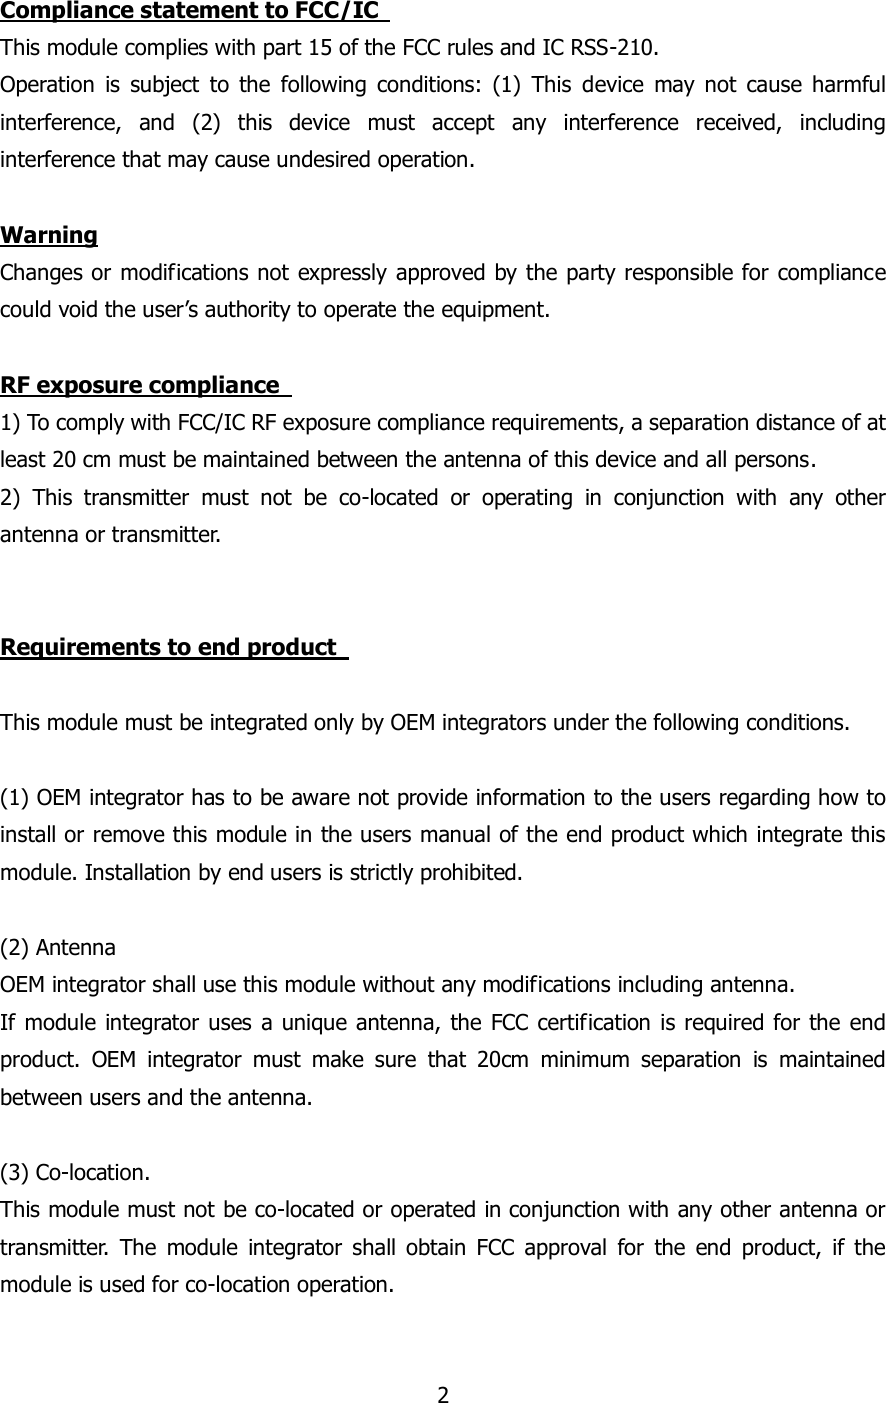 2  Compliance statement to FCC/IC   This module complies with part 15 of the FCC rules and IC RSS-210. Operation  is  subject  to  the  following  conditions:  (1)  This  device  may  not  cause  harmful interference,  and  (2)  this  device  must  accept  any  interference  received,  including interference that may cause undesired operation.    Warning Changes or modifications not expressly approved by the party responsible for compliance could void the user’s authority to operate the equipment.  RF exposure compliance   1) To comply with FCC/IC RF exposure compliance requirements, a separation distance of at least 20 cm must be maintained between the antenna of this device and all persons. 2)  This  transmitter  must  not  be  co-located  or  operating  in  conjunction  with  any  other antenna or transmitter.   Requirements to end product    This module must be integrated only by OEM integrators under the following conditions.  (1) OEM integrator has to be aware not provide information to the users regarding how to install or remove this module in the users manual of the end product which integrate this module. Installation by end users is strictly prohibited.  (2) Antenna   OEM integrator shall use this module without any modifications including antenna.   If module  integrator uses a unique antenna, the  FCC certification  is required for the end product.  OEM  integrator  must  make  sure  that  20cm  minimum  separation  is  maintained between users and the antenna.  (3) Co-location.   This module must not be co-located or operated in conjunction with any other antenna or transmitter.  The  module  integrator  shall  obtain  FCC  approval  for  the  end  product,  if  the module is used for co-location operation.    